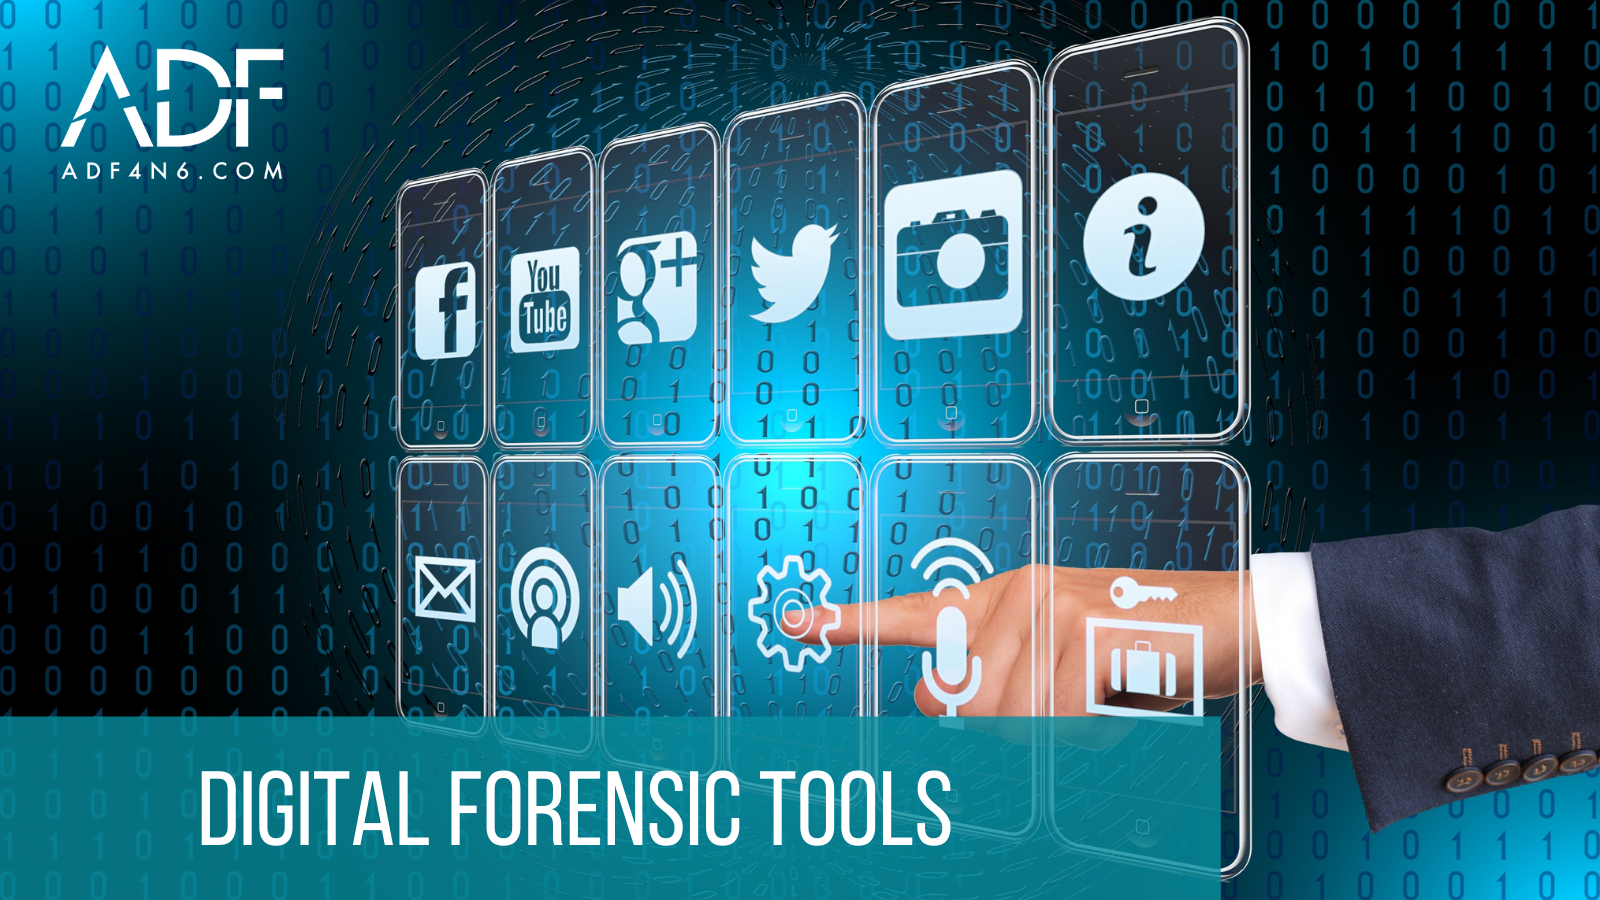 How Digital Forensic Tools Can Help You: The Importance of Forensics